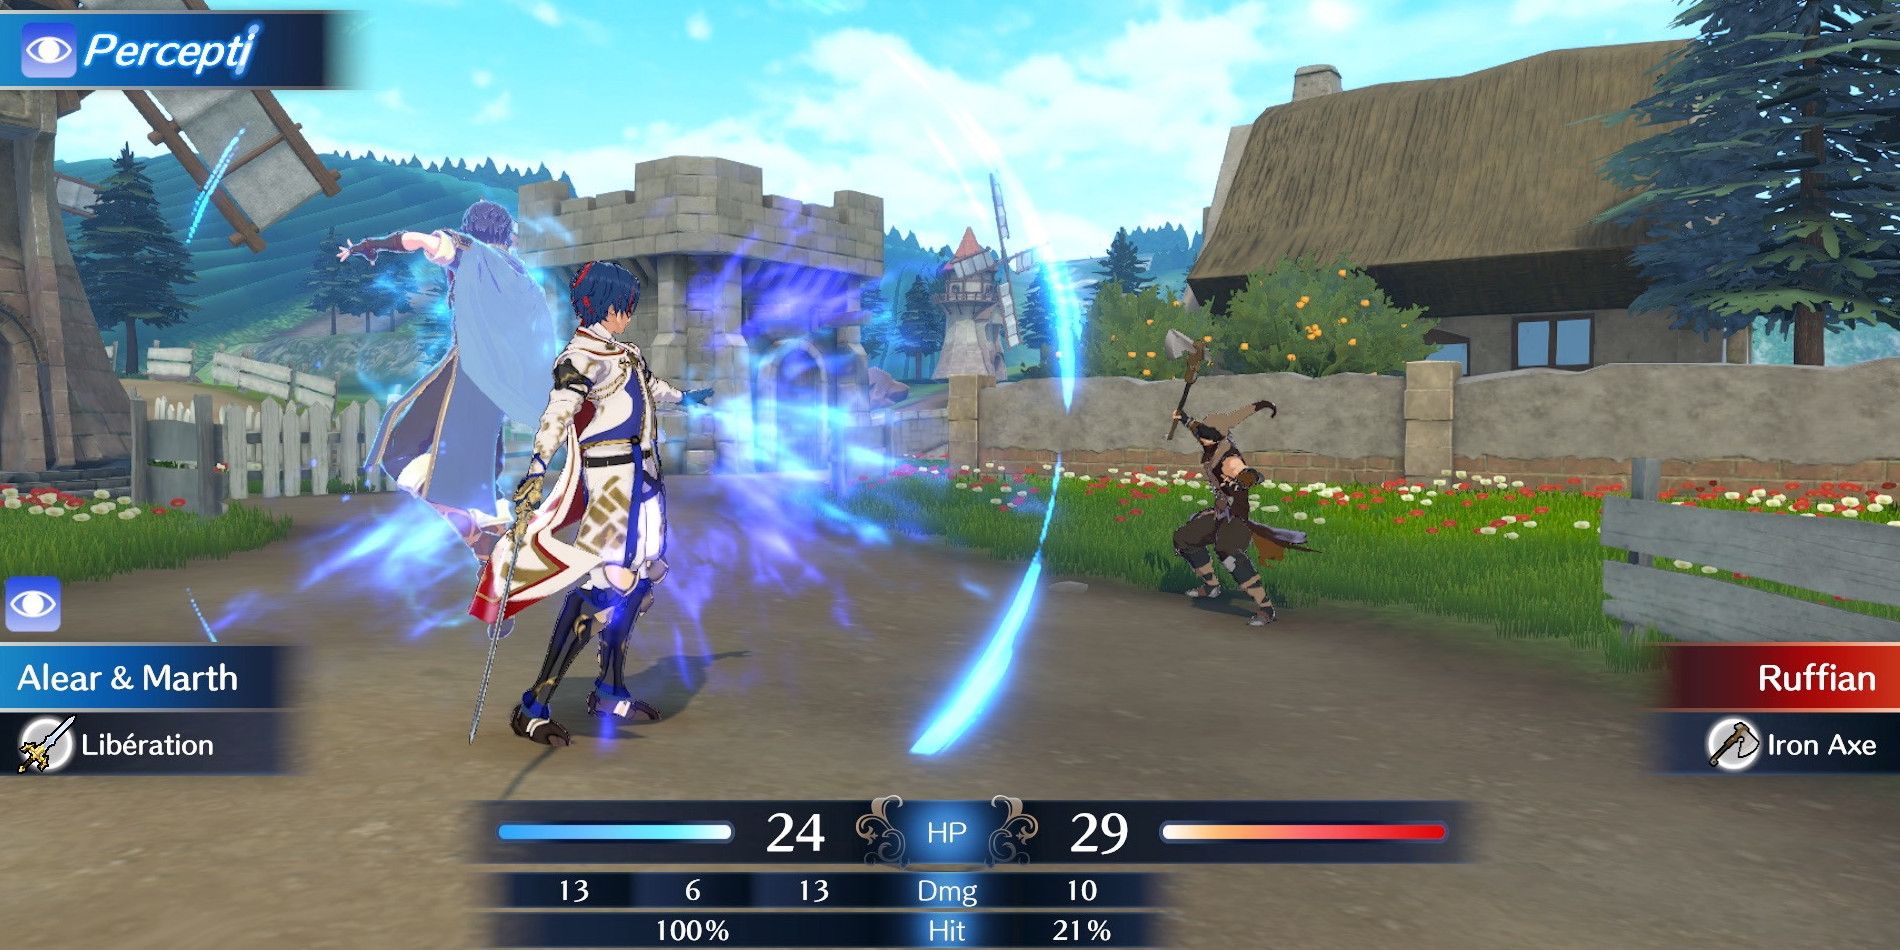 Alear and Marth attacking A Ruffian on the battlefield